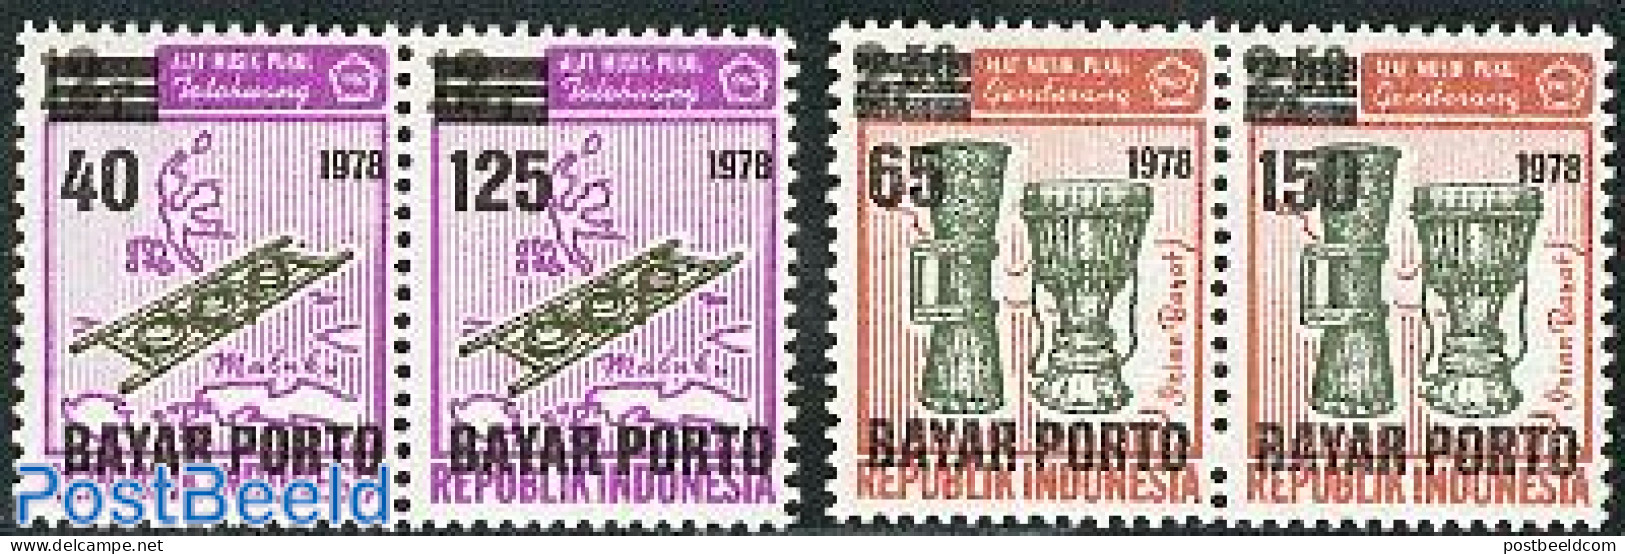 Indonesia 1978 Postage Due 2 Pairs, Mint NH, Performance Art - Music - Musical Instruments - Musique